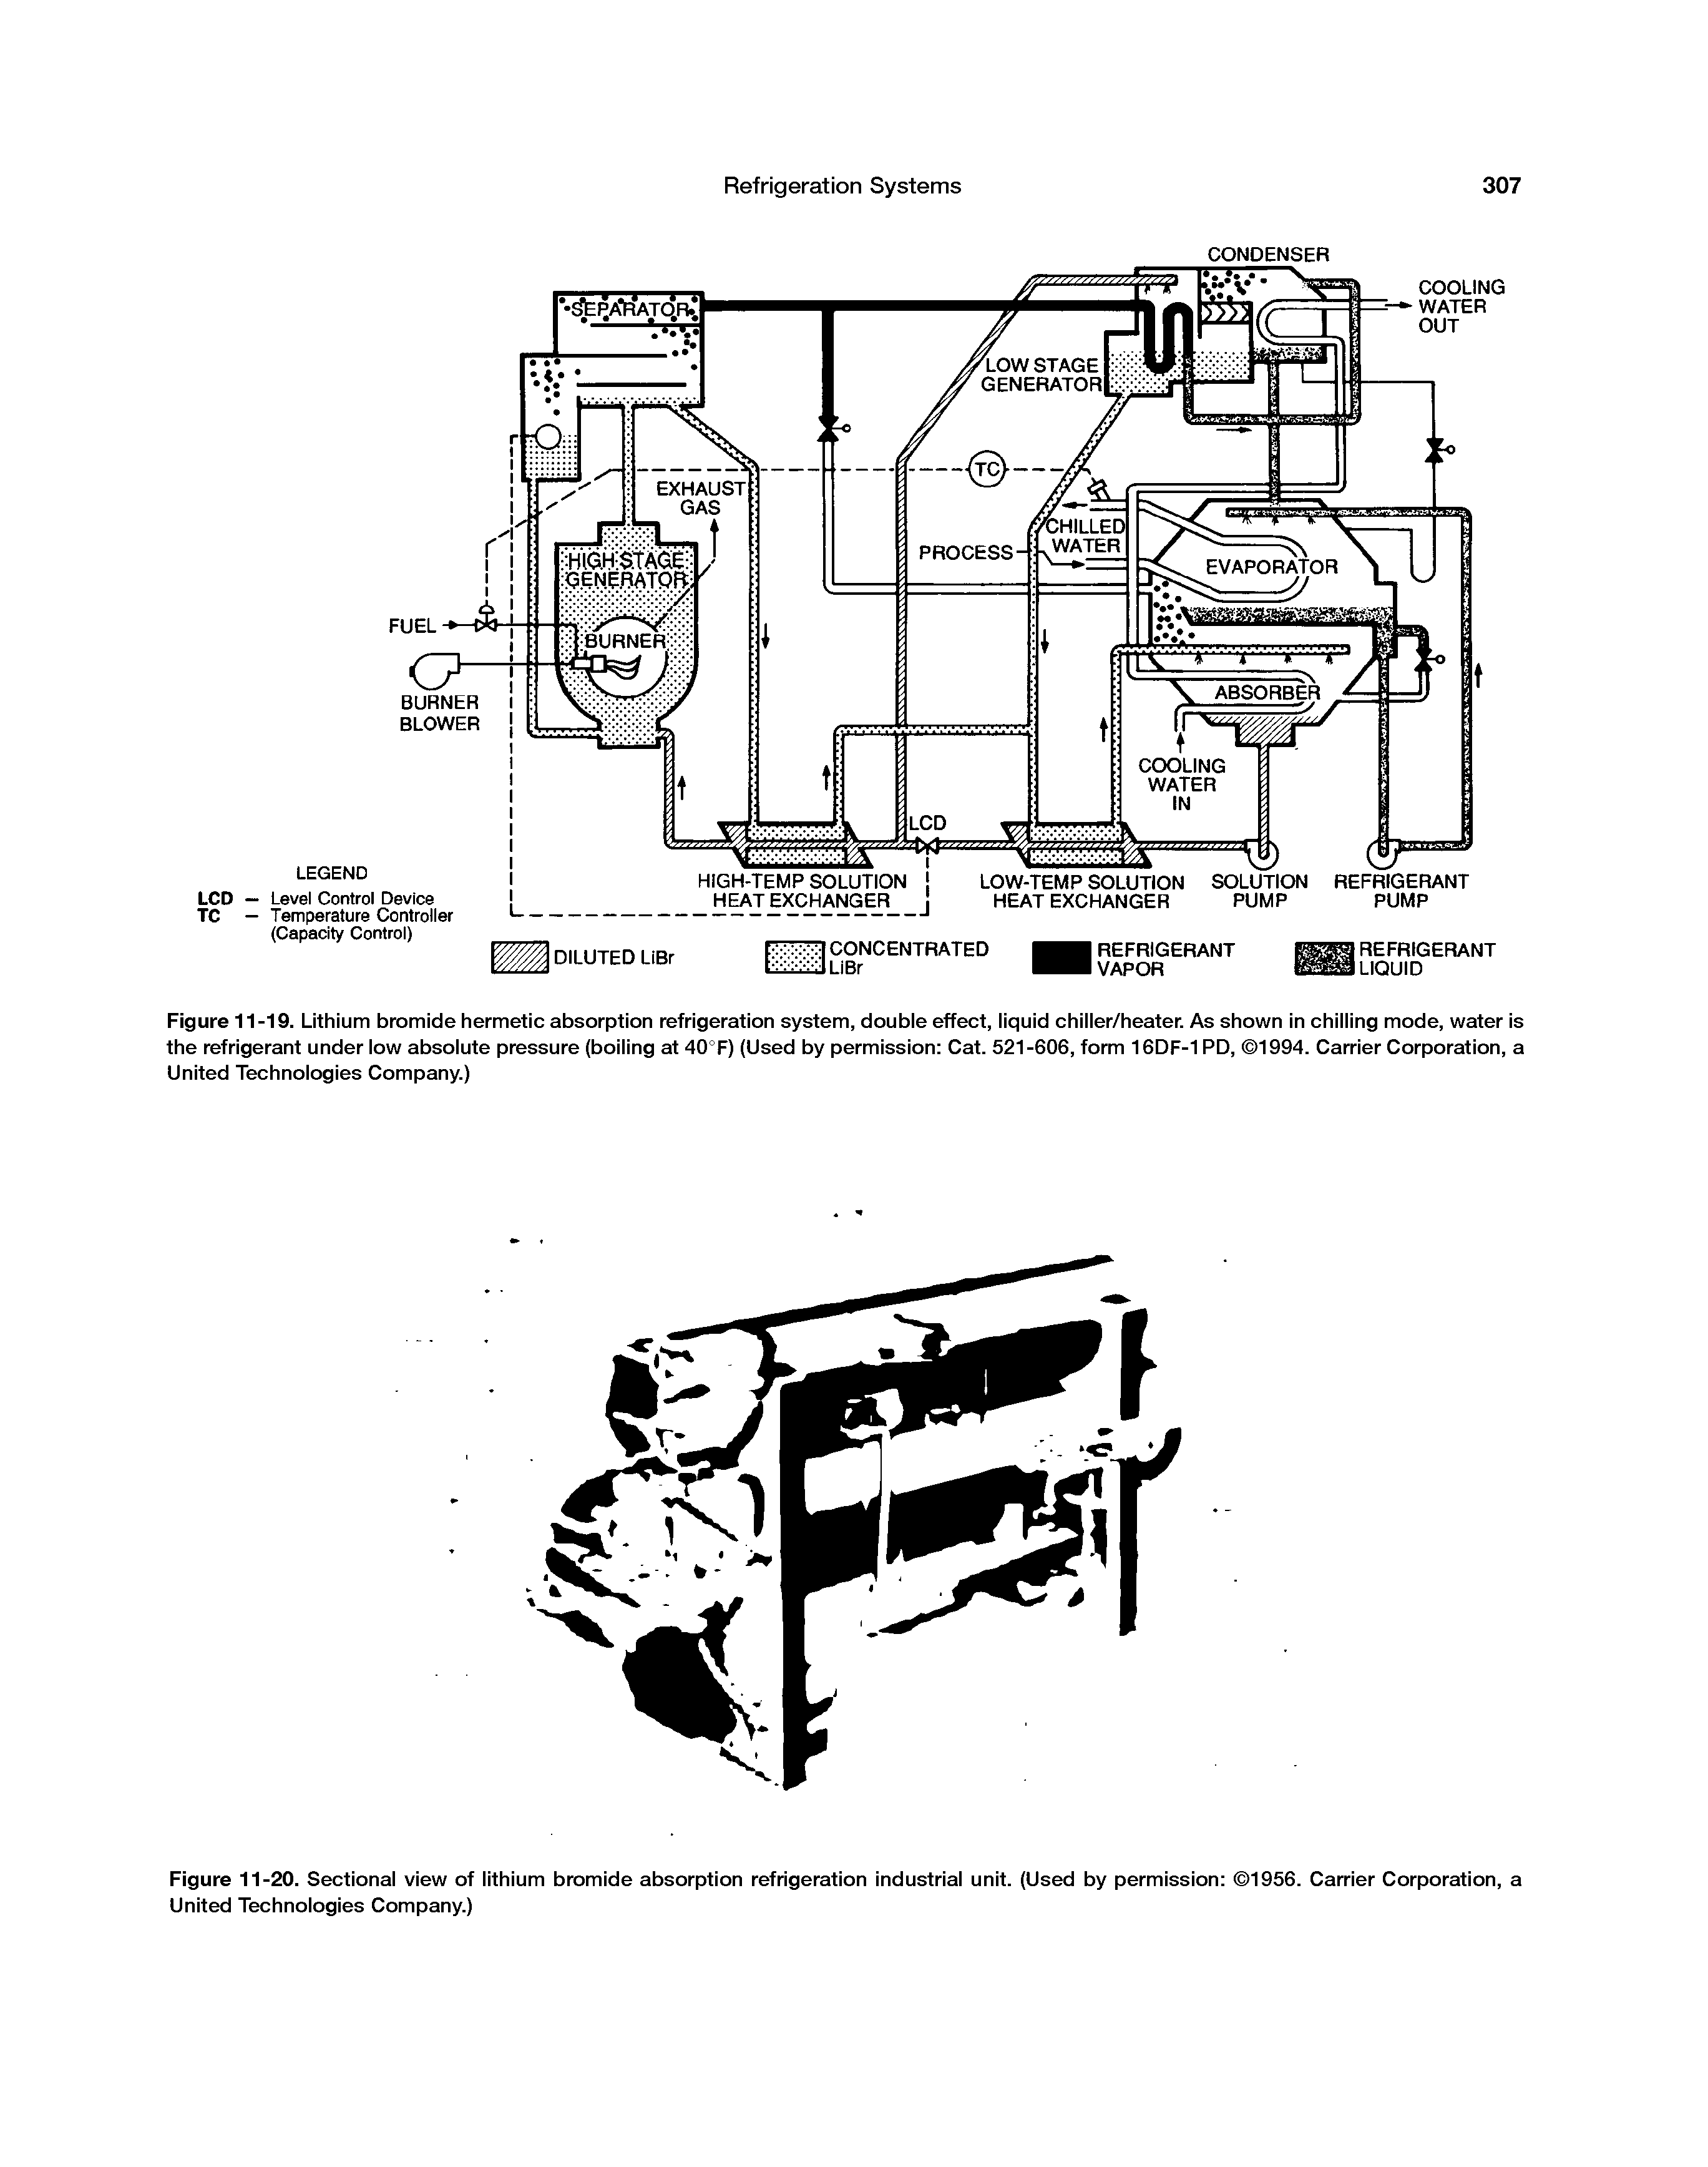 Figure 11-20. Sectional view of lithium bromide absorption refrigeration industrial unit. (Used by permission 1956. Carrier Corporation, a United Technologies Company.)...